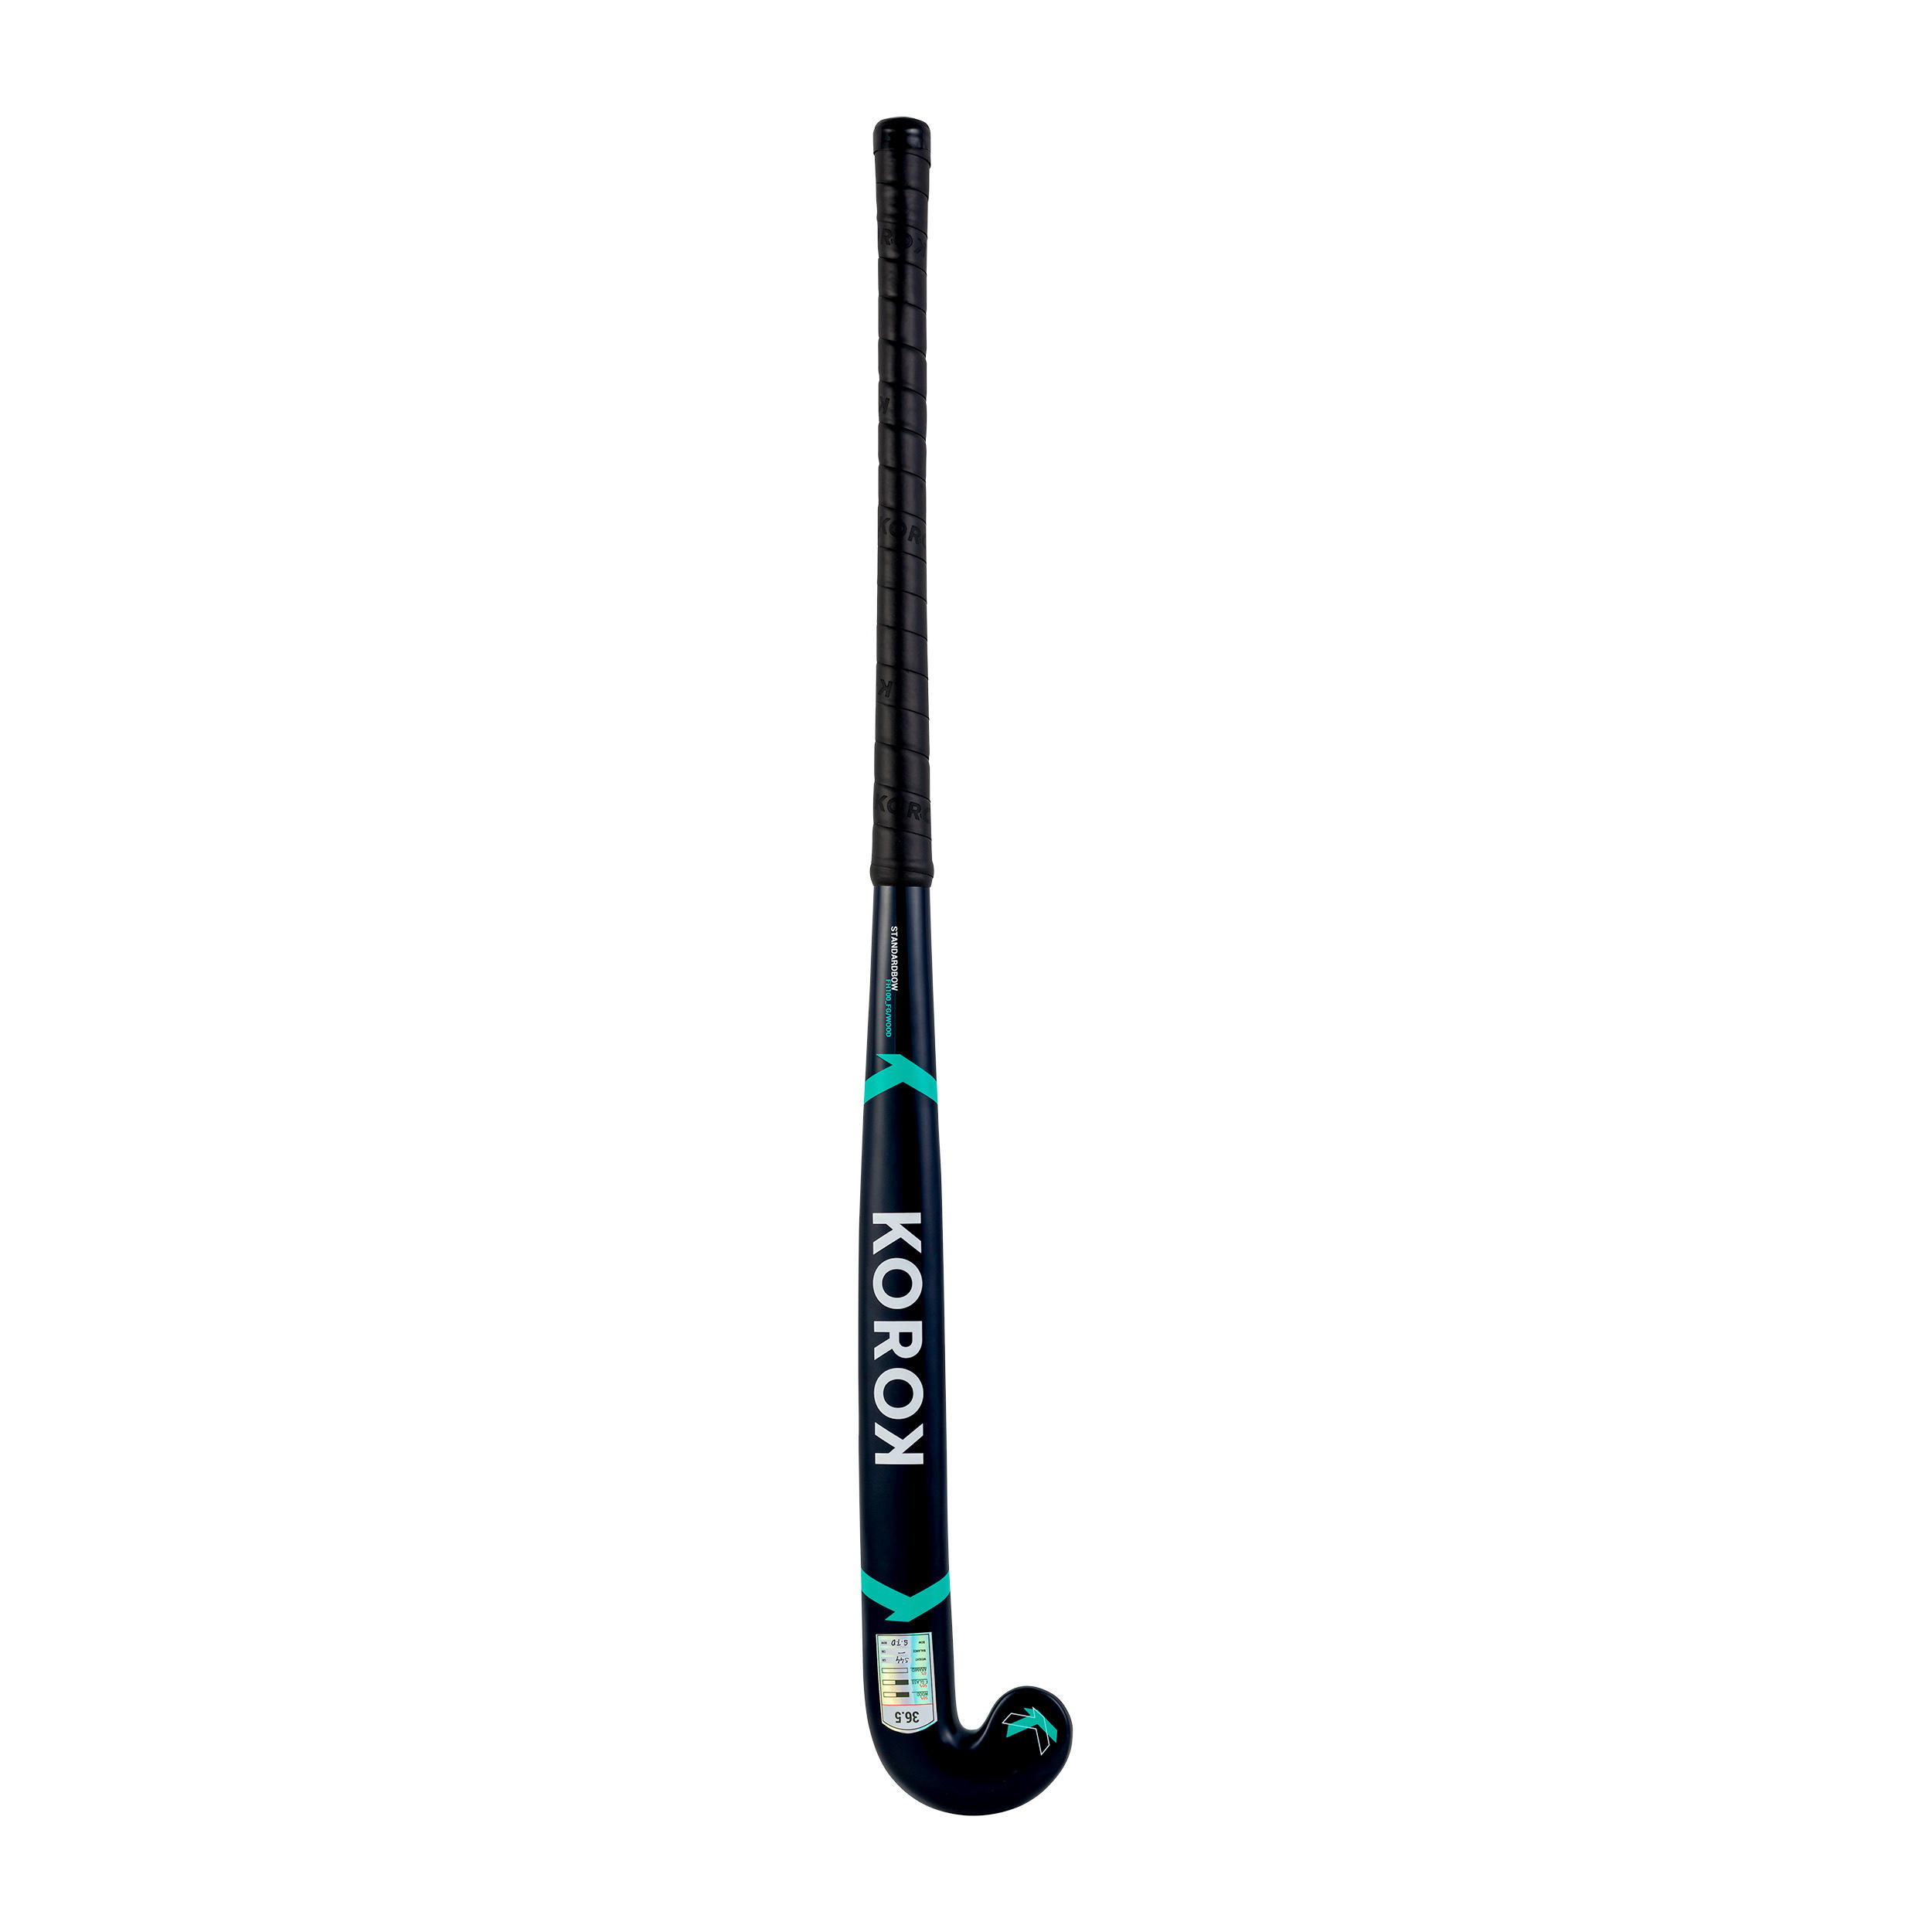 Adult Occasional Wood/Fibreglass Field Hockey Stick FH100 - Turquoise Blue 7/12